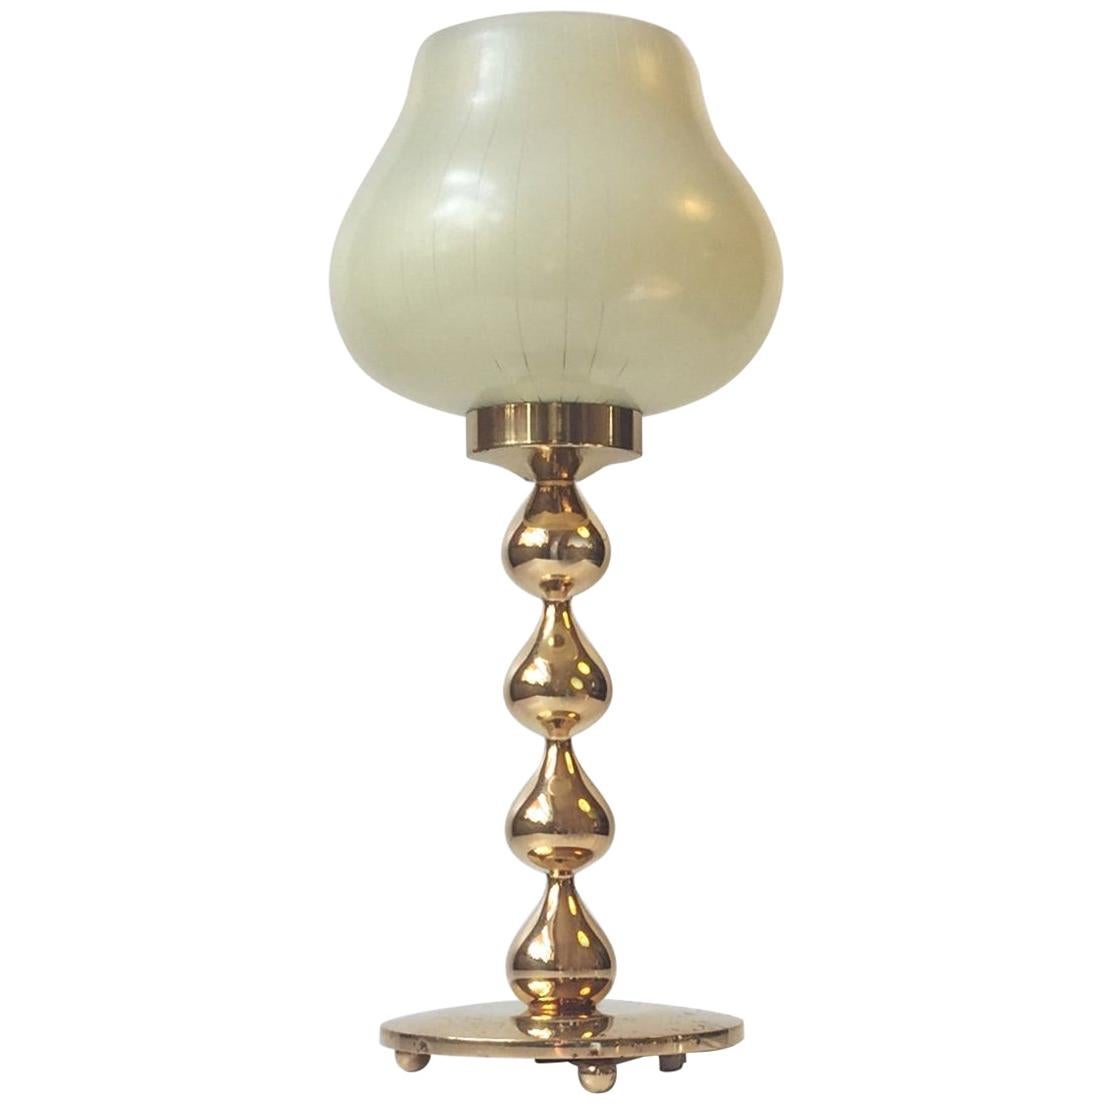 Midcentury 24-Carat Gold-Plated Table Lamp by Hugo Asmussen, 1960s